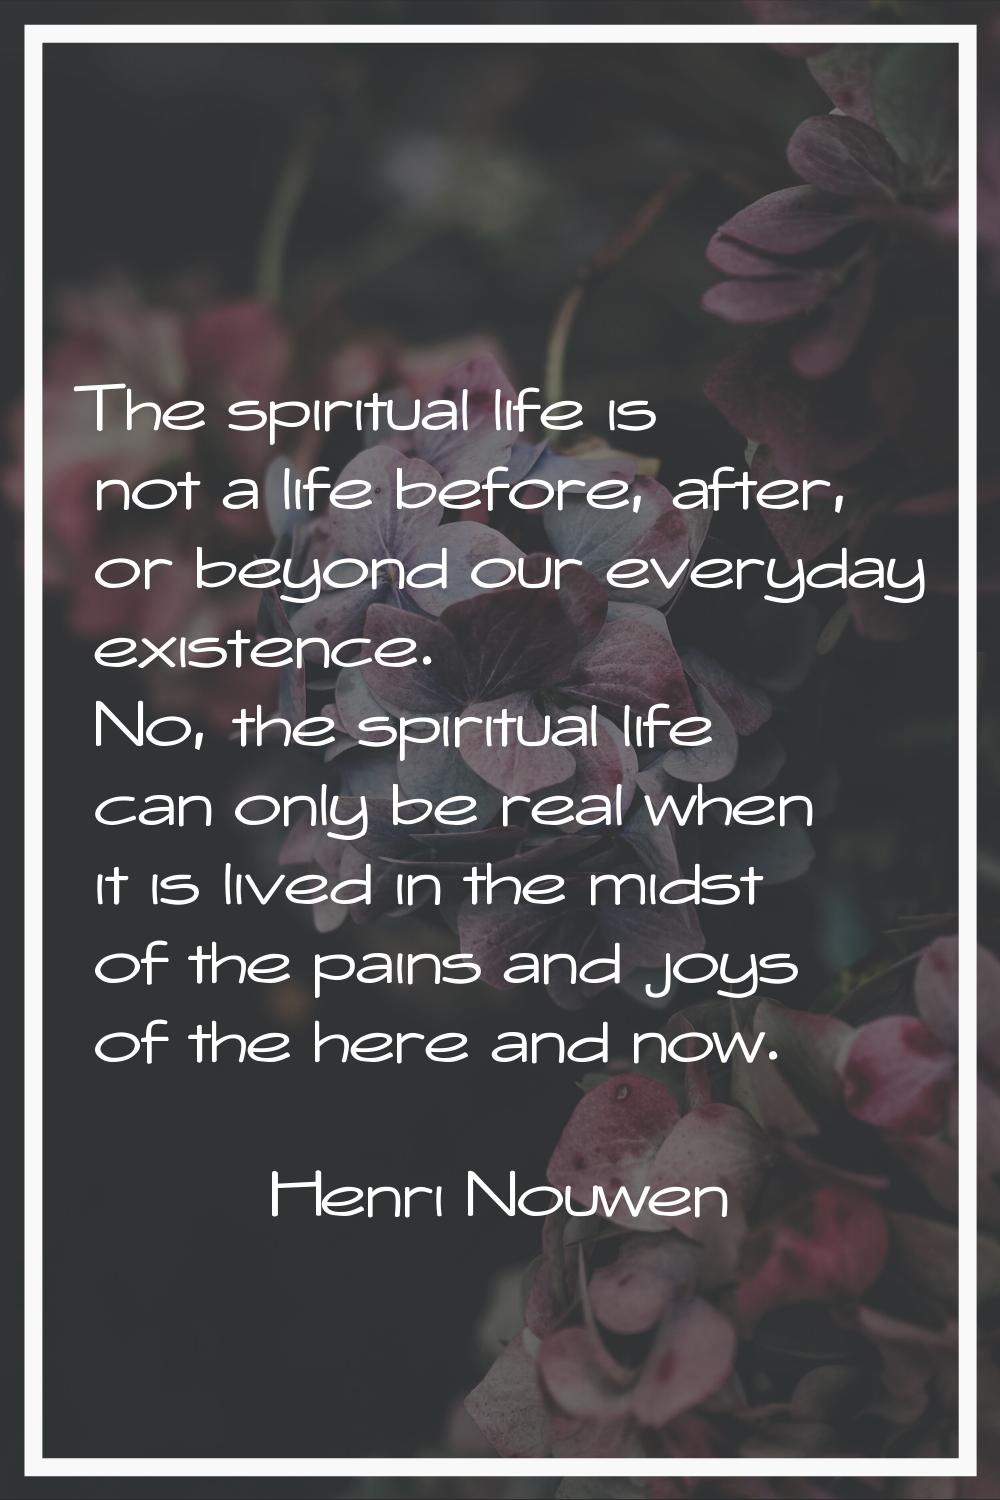 The spiritual life is not a life before, after, or beyond our everyday existence. No, the spiritual